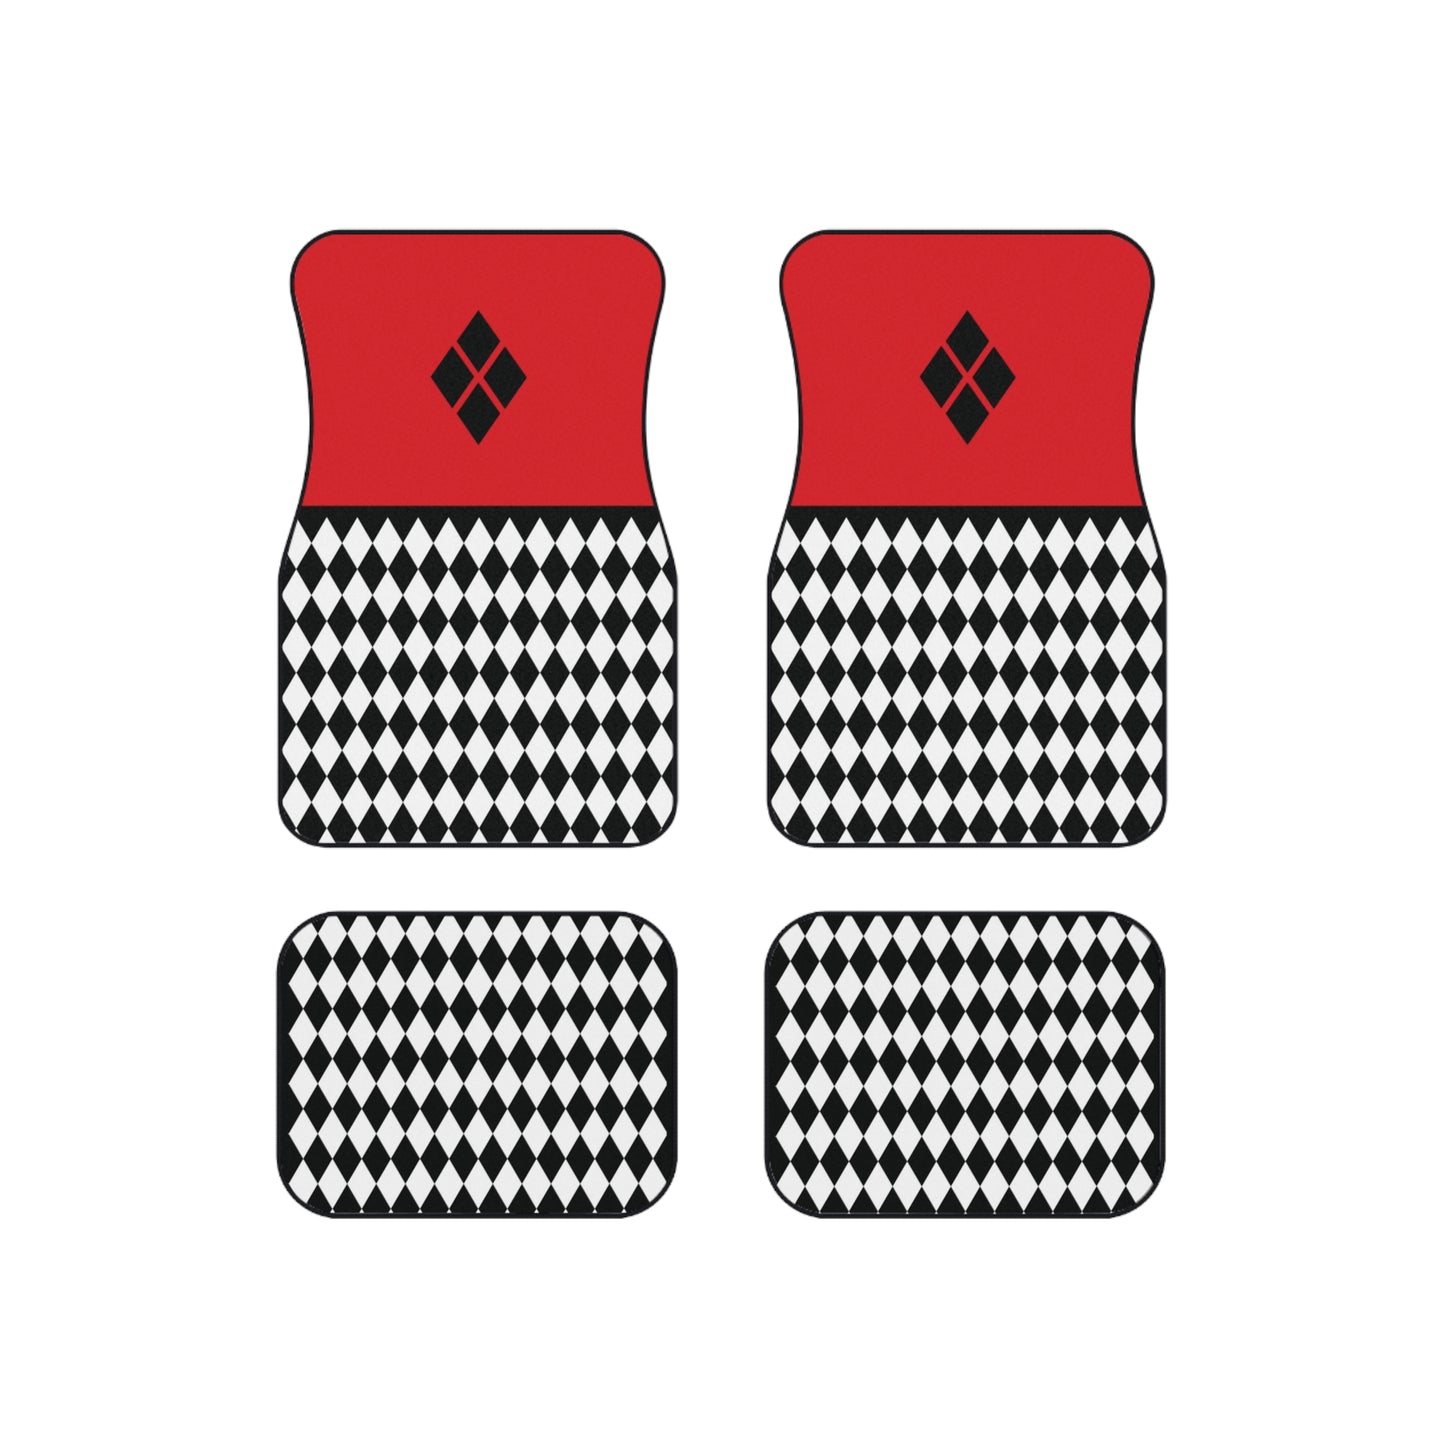 Harley B&W Diamonds Front And Back Car Mats (Set Of 4)